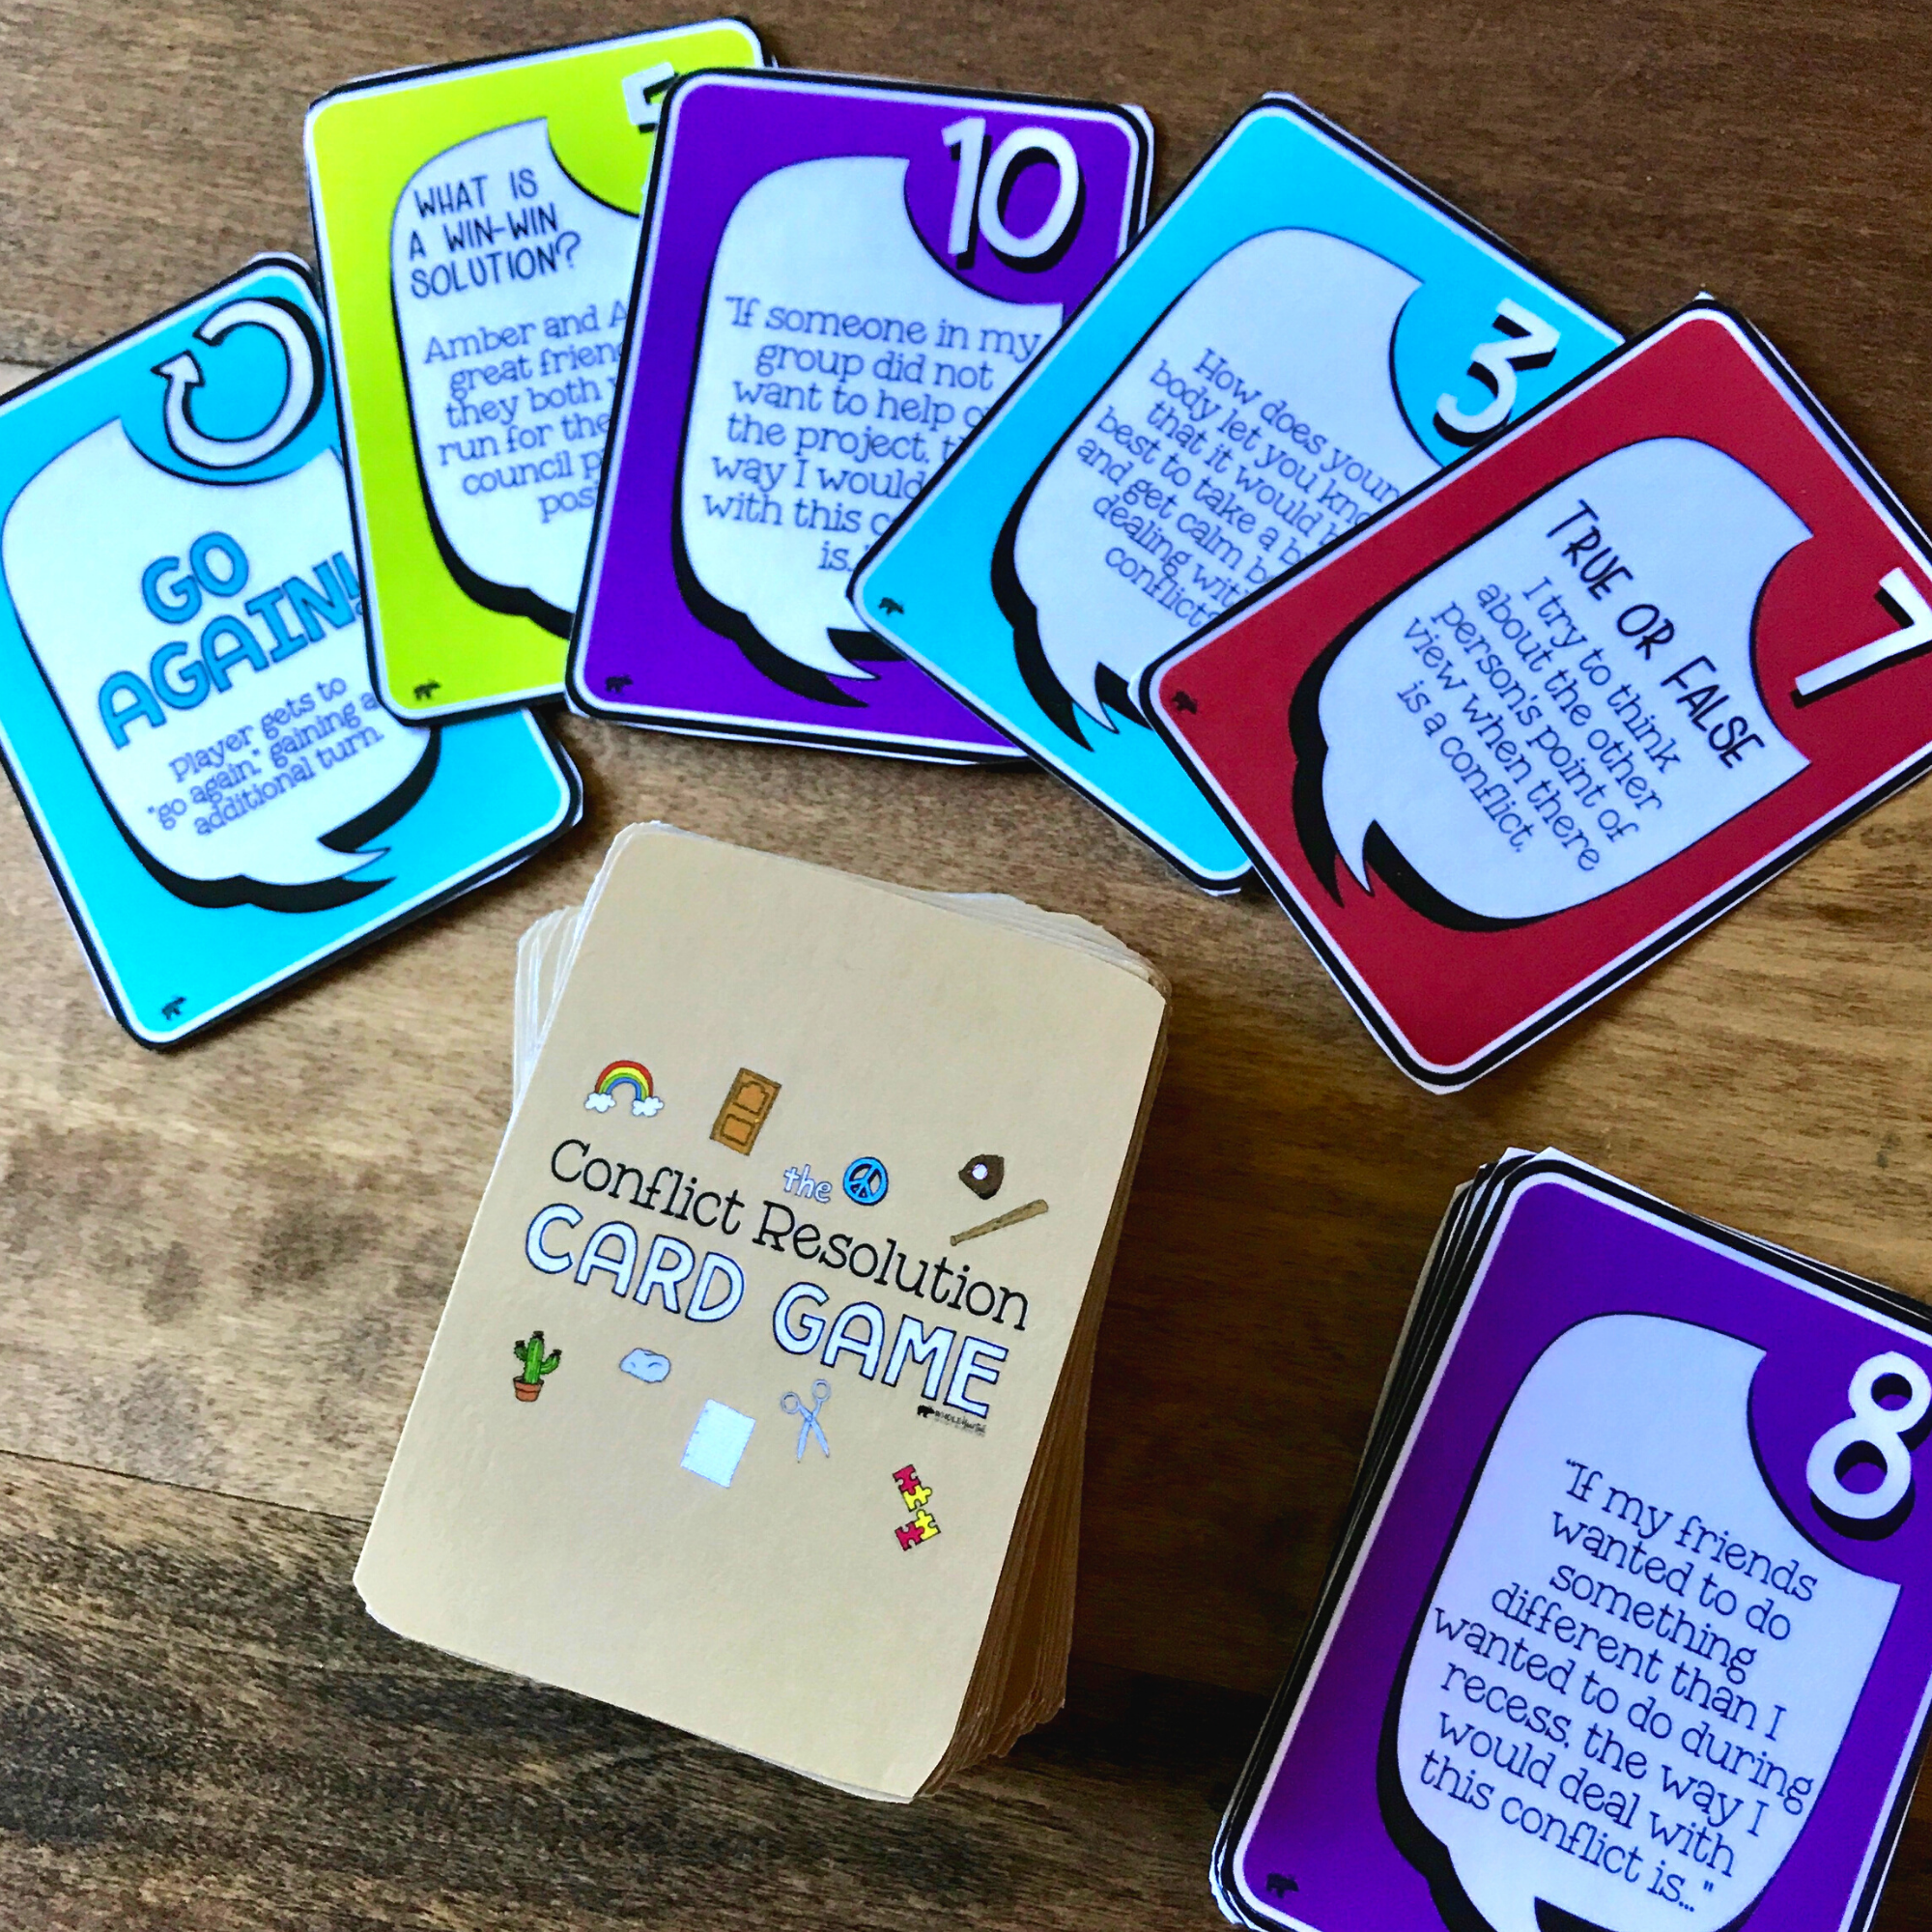 The Conflict Resolution Card Game teaches kids important social skills for dealing with conflict.